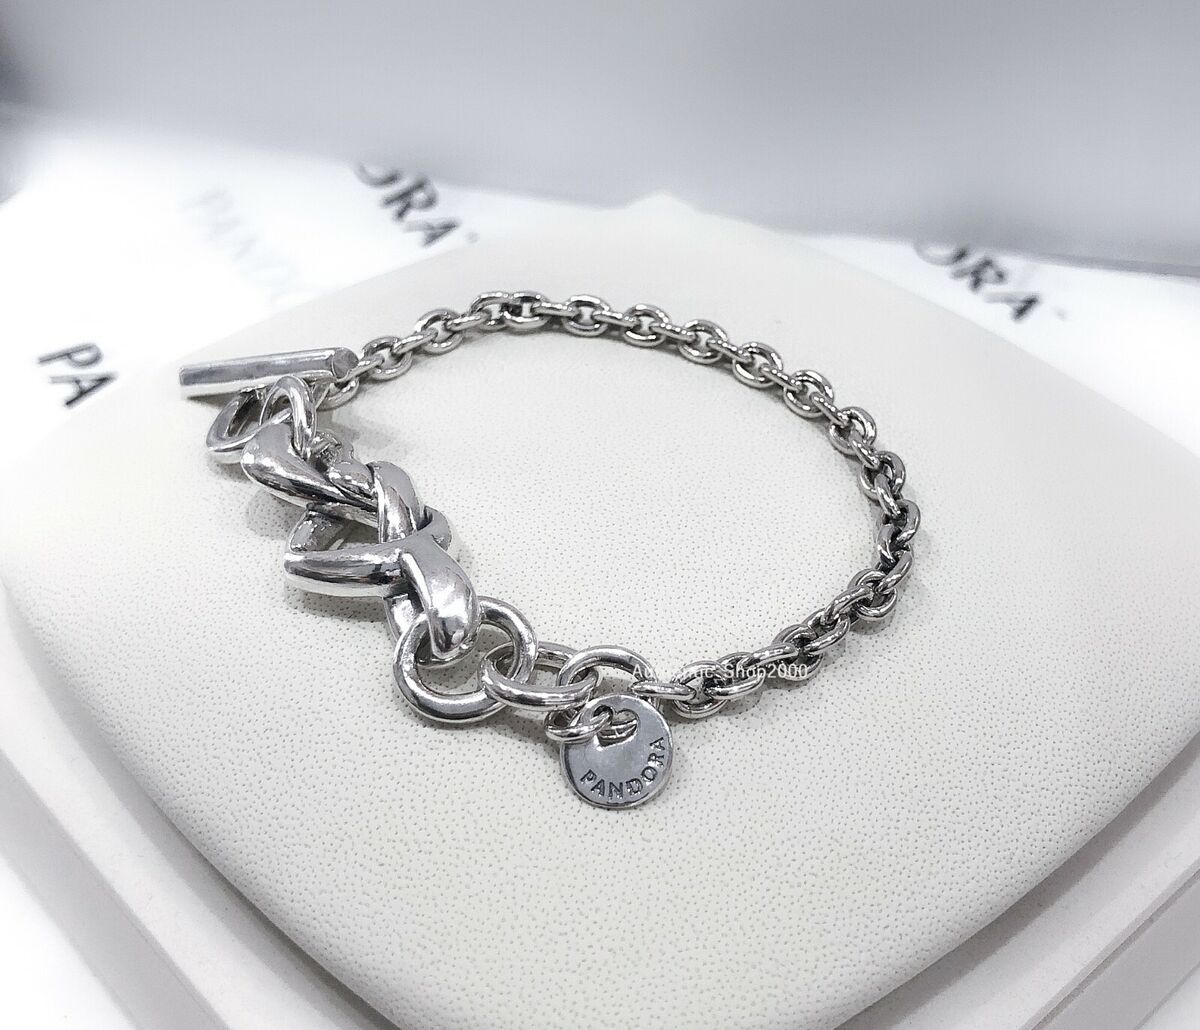 NEW Authentic PANDORA 925 Silver Knotted T-Bar Link Chain Bracelet | eBay